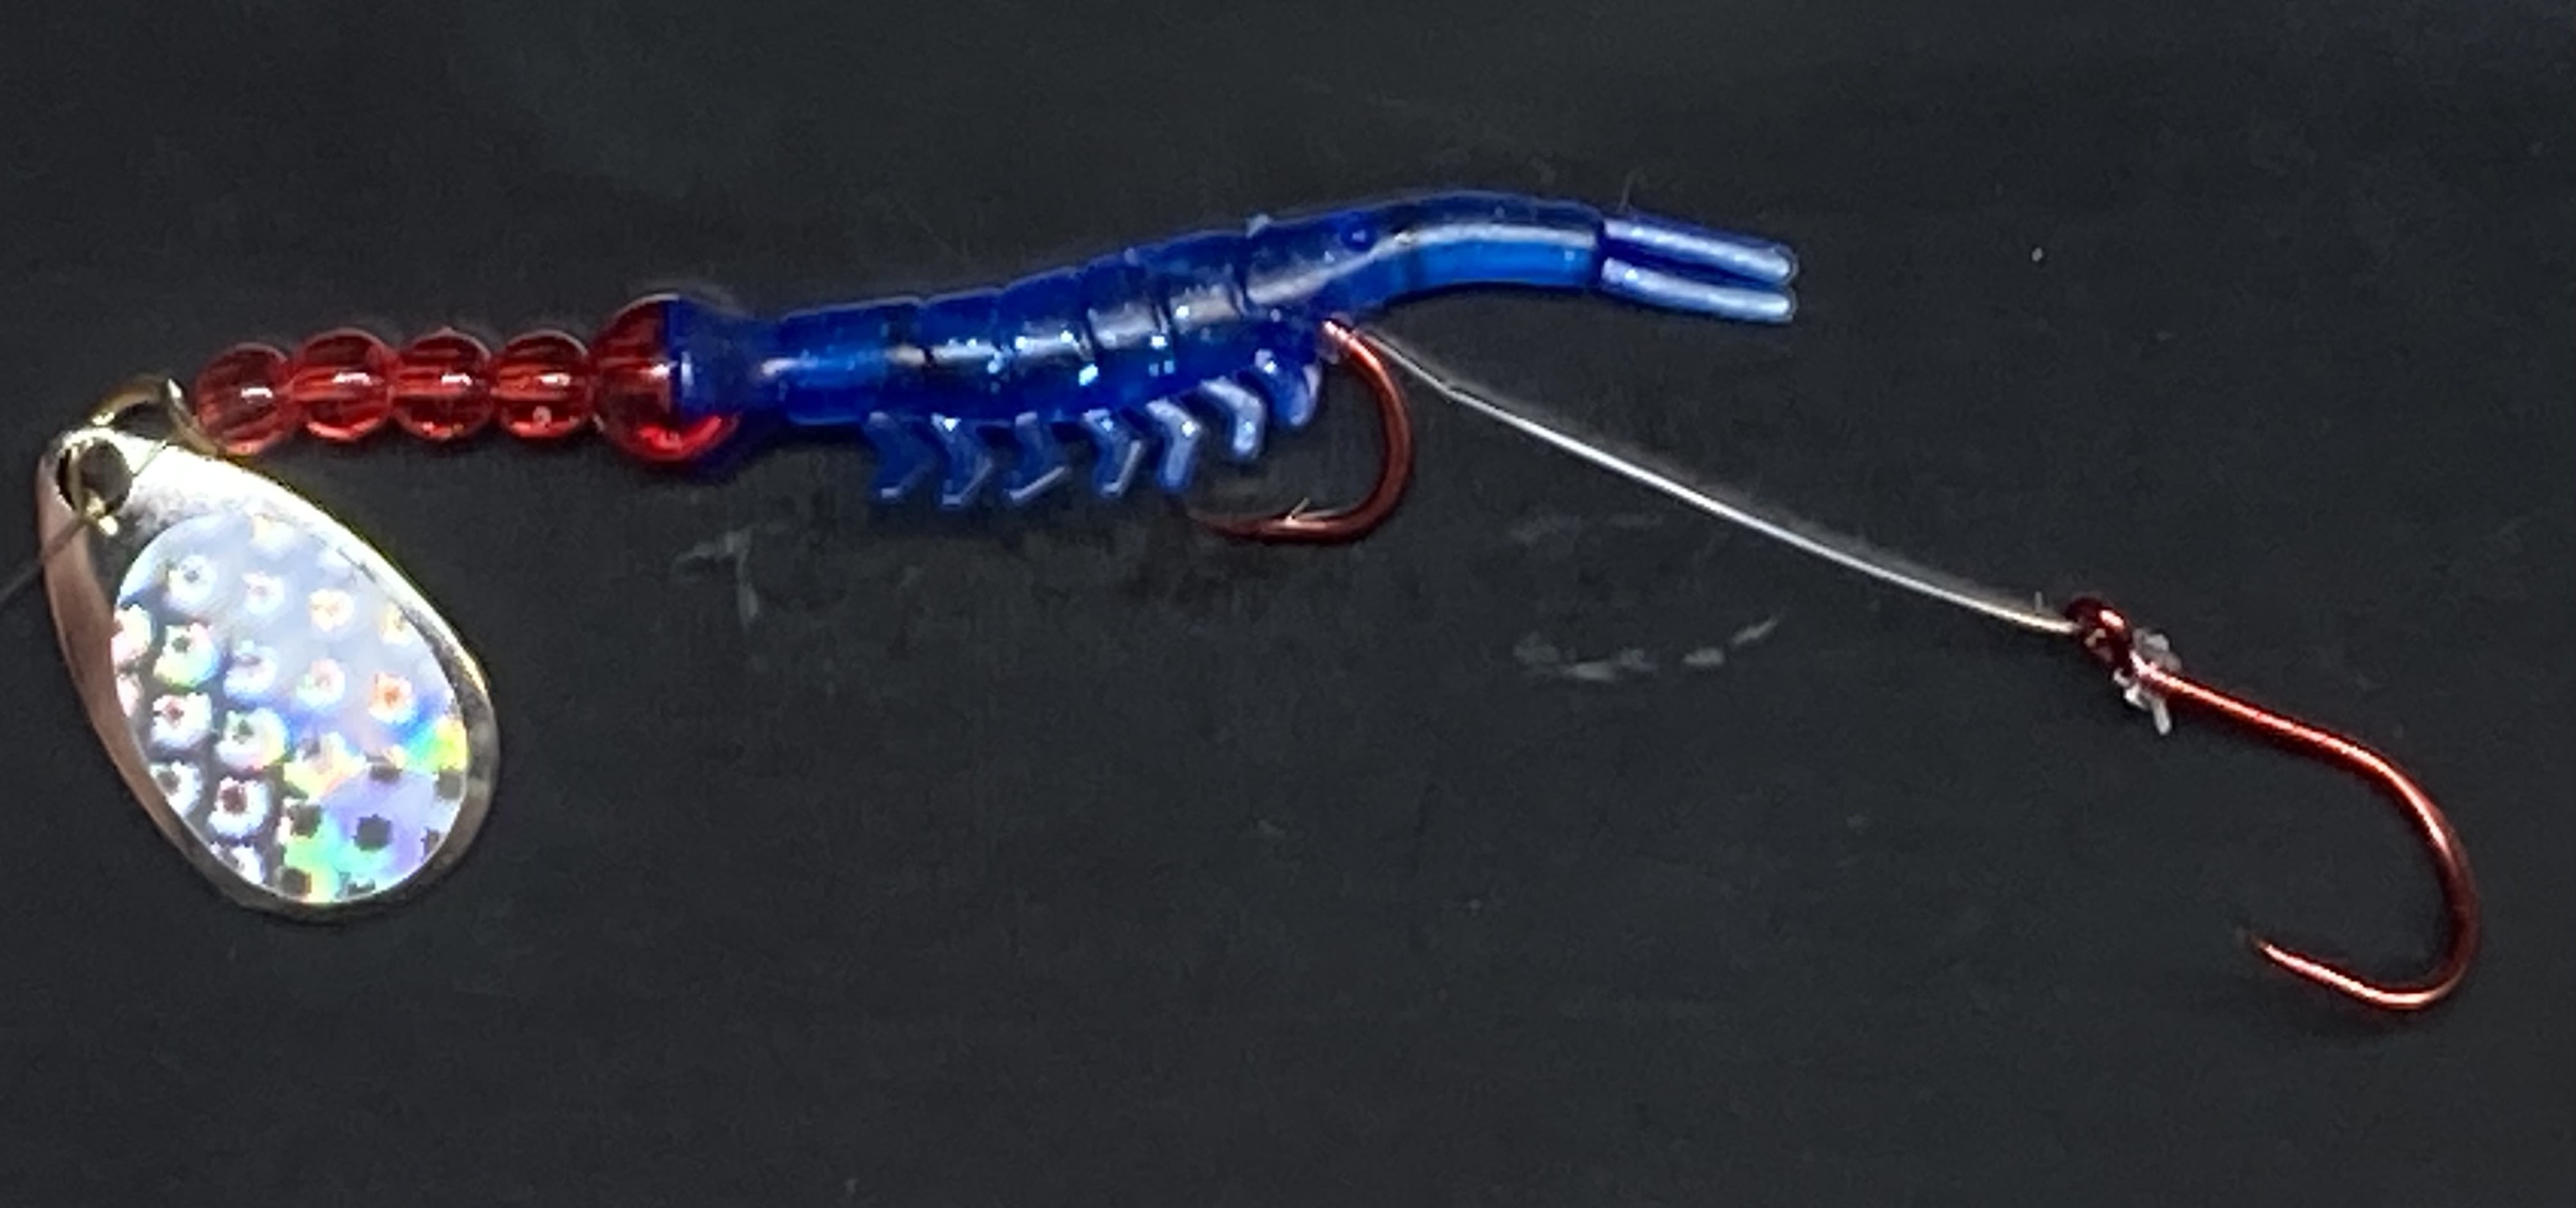 Blue Ruby Red on Nickel/Silver Scale - Savage Micro Shrimp